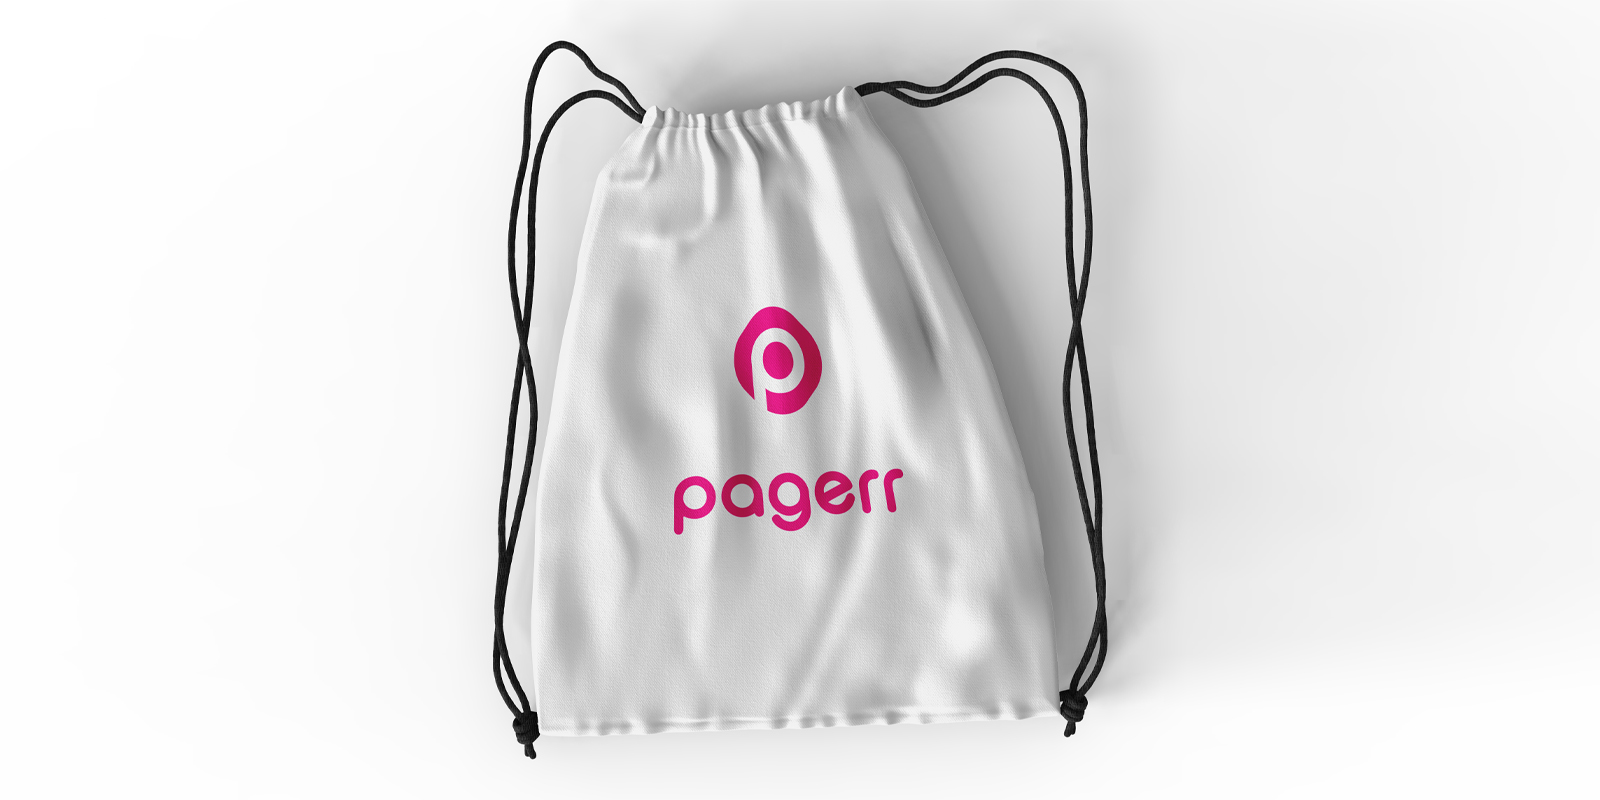 Drawstring backpacks in Valencia - Print with Pagerr